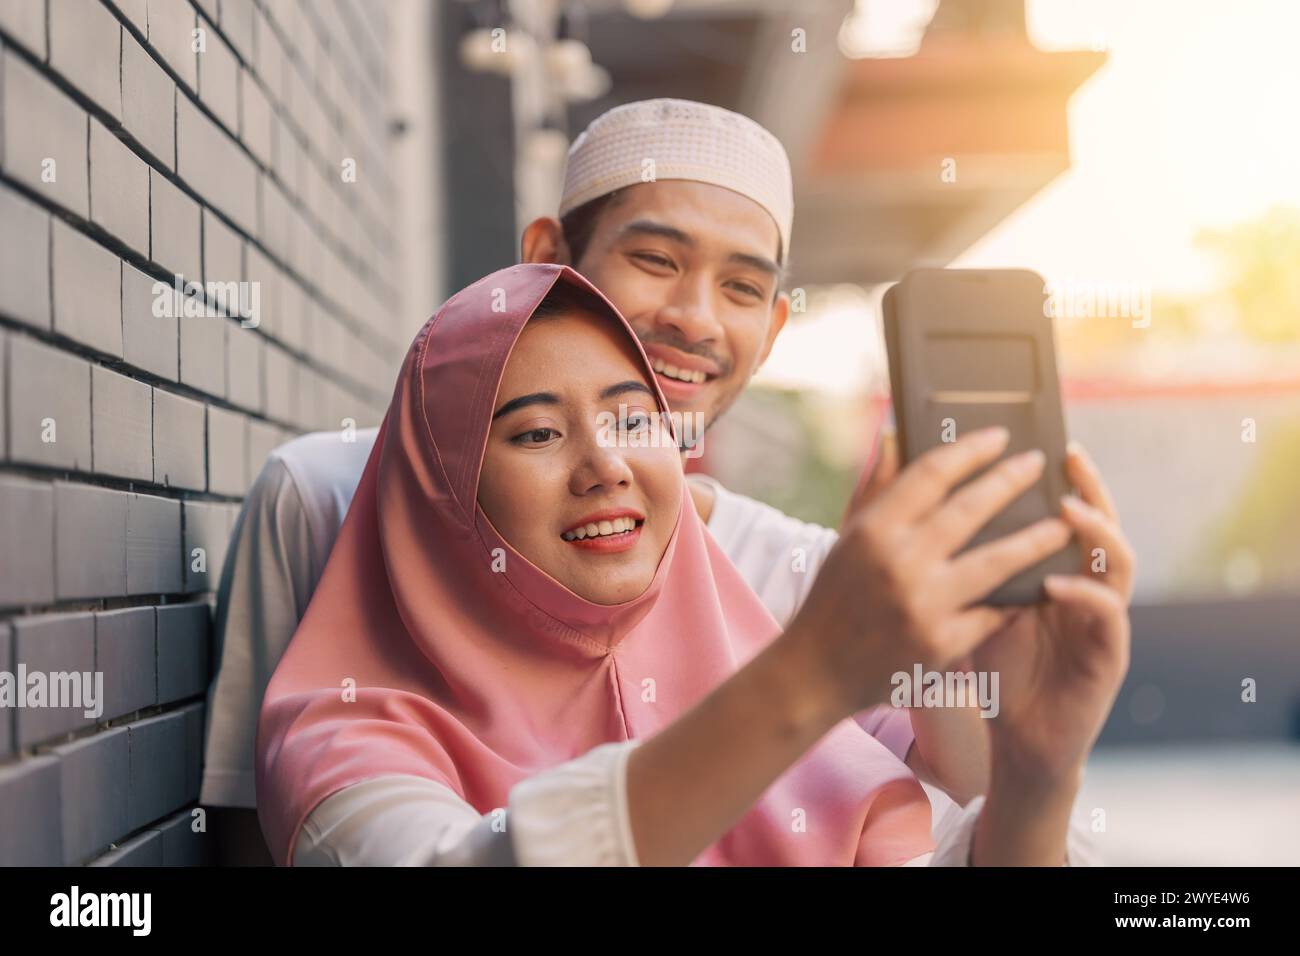 muslim people teen happy play smartphone relax enjoy together. islamic using cell phone outdoors Stock Photo